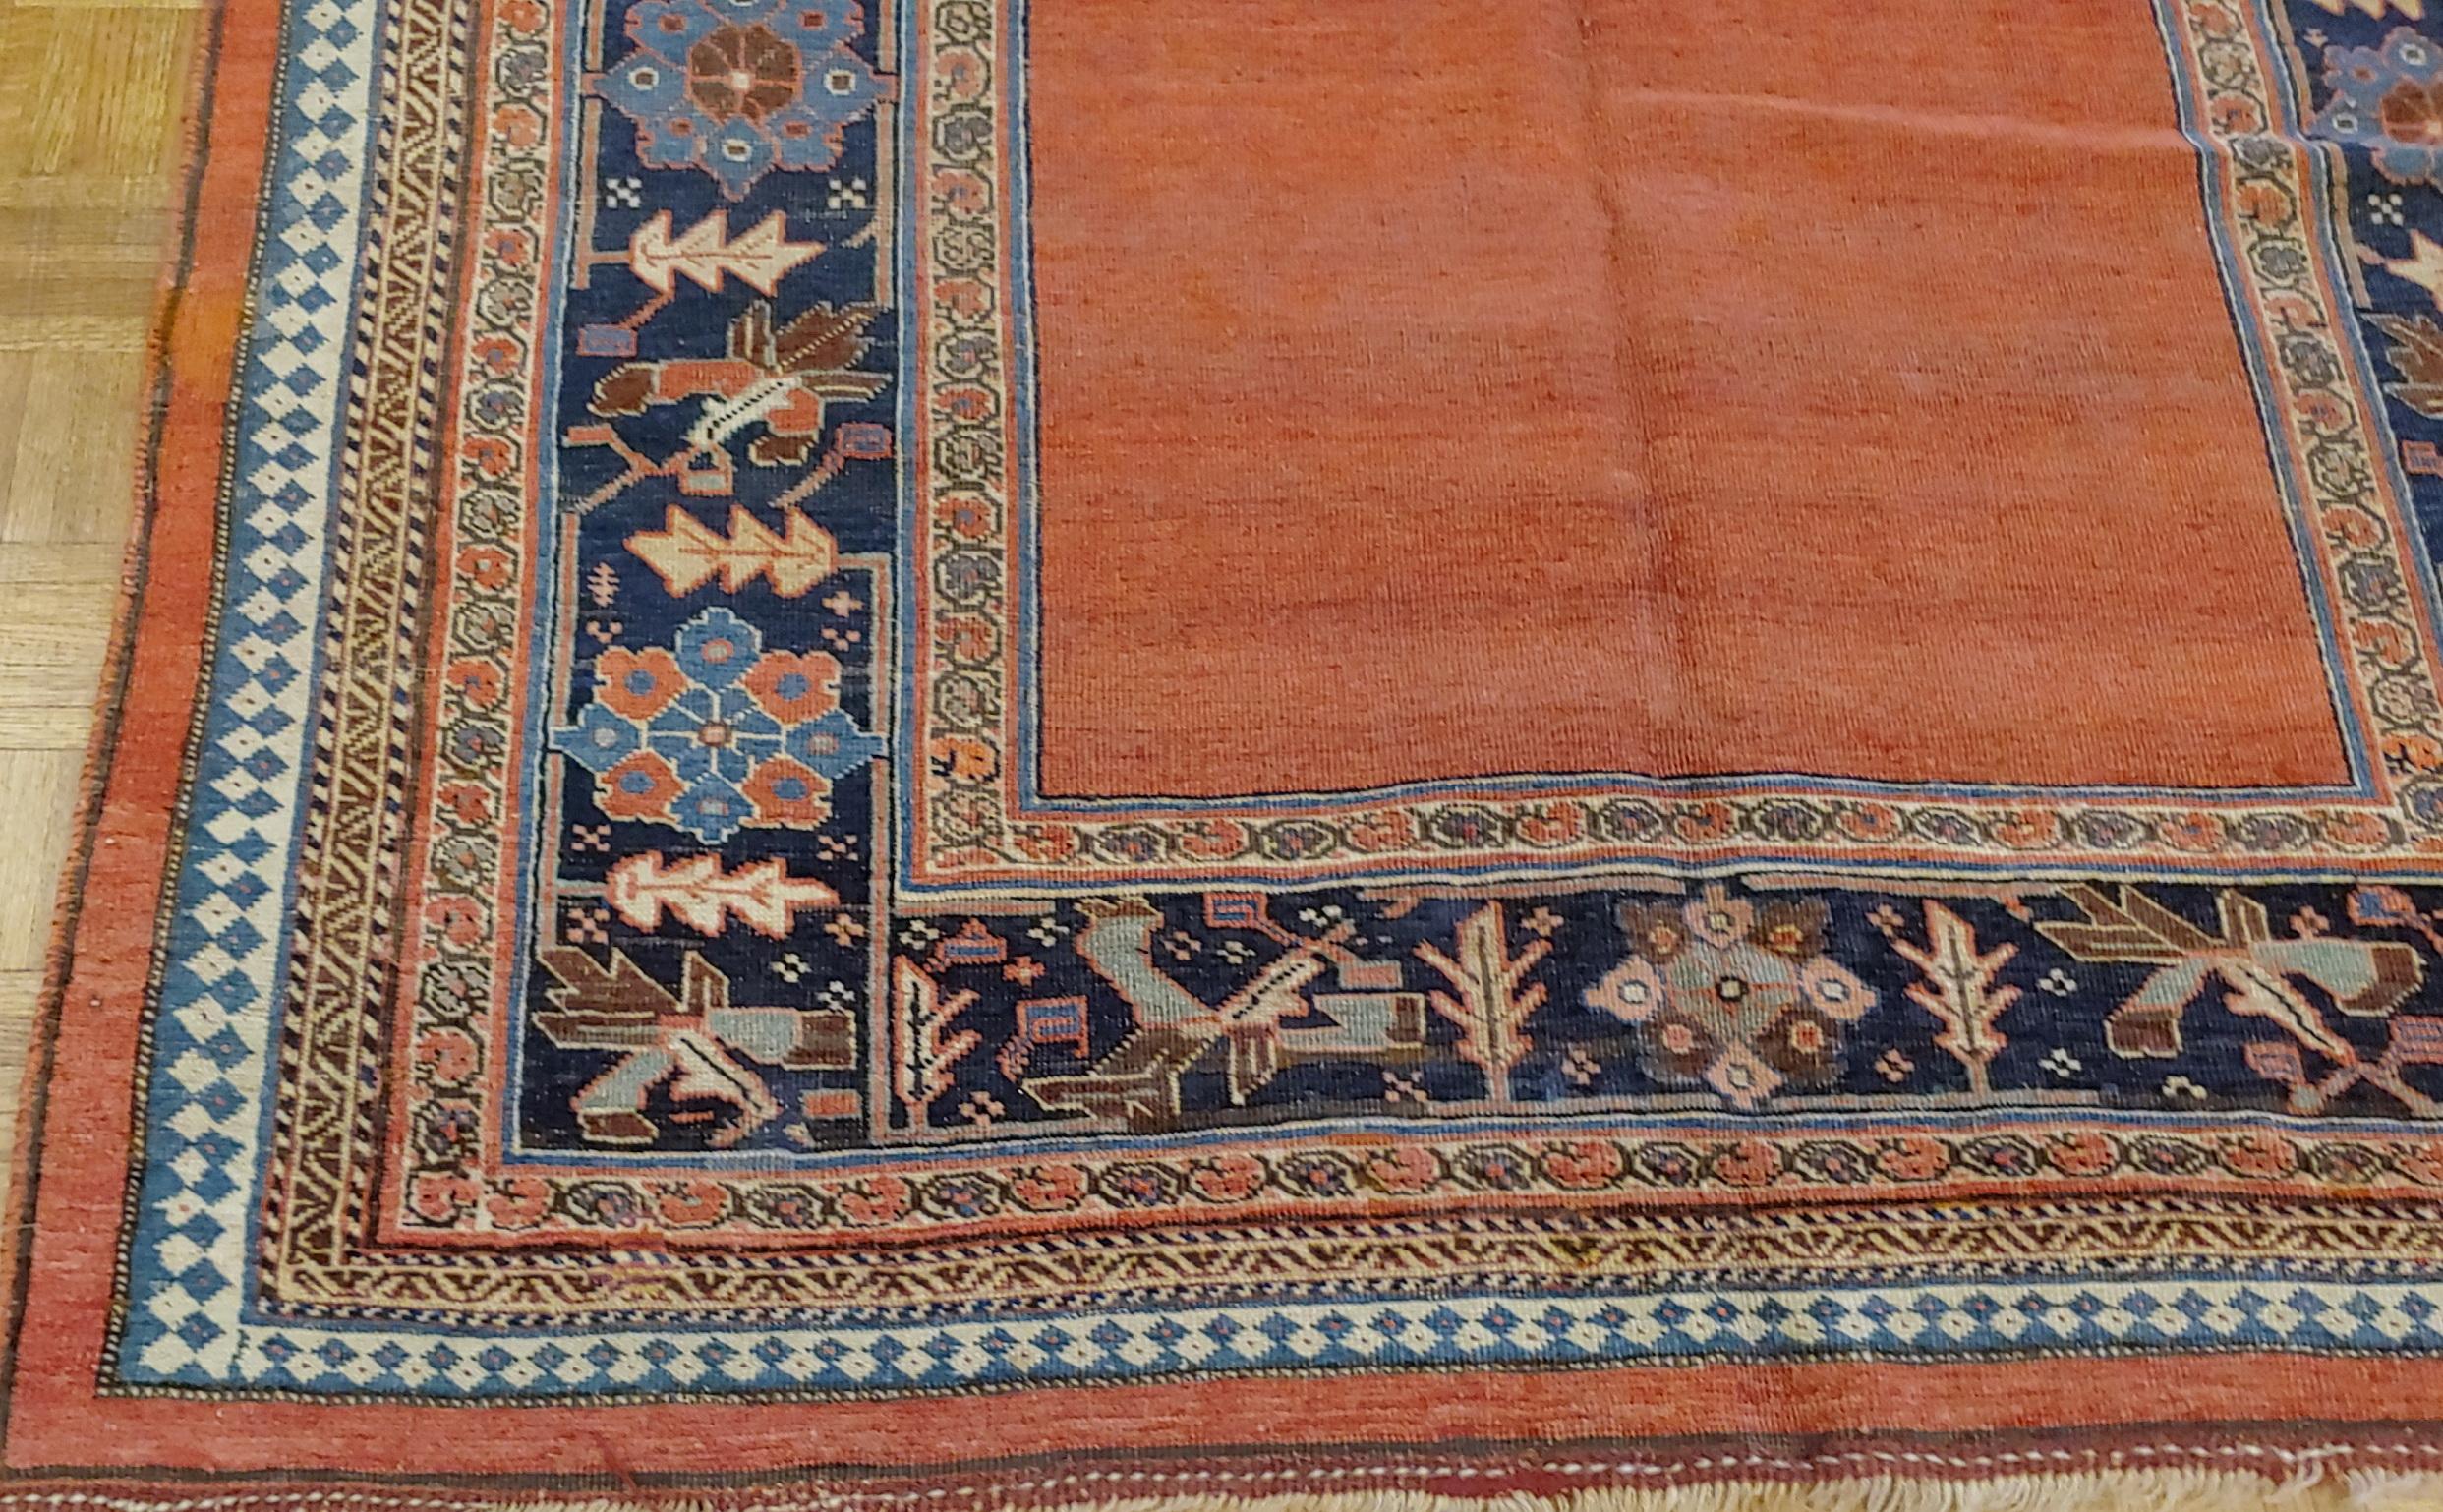 This very unusual antique Persian Bidjar (Bijar) has a solid rust background all-over field design with a navy border. The field is decorated with vines, tendrills and flowers in light blue. It is 5-5 x 8, circa 1895.